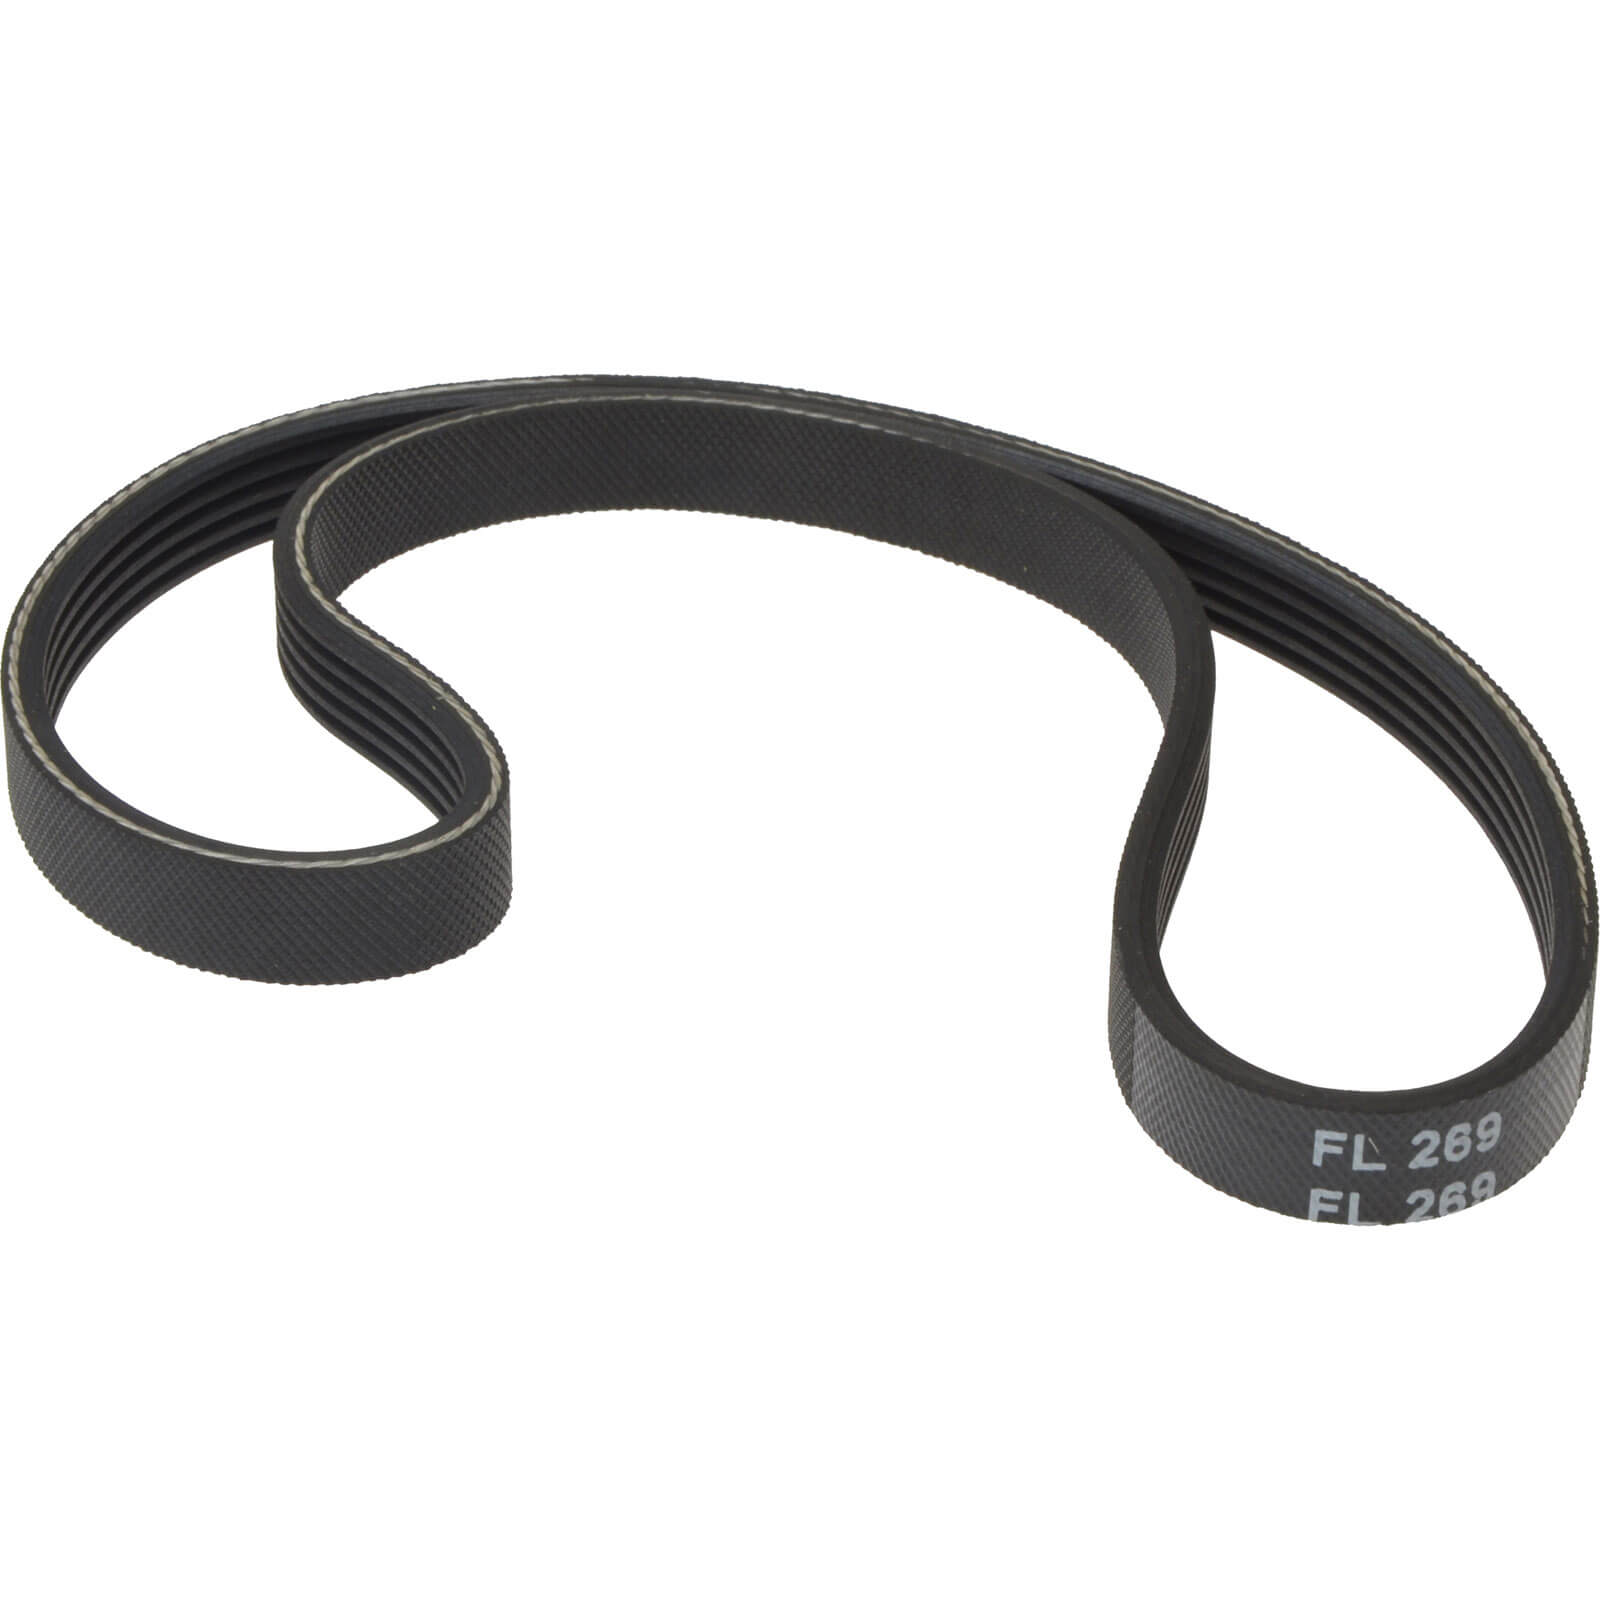 Photos - Lawn Mower Accessory ALM FL269 Poly V Belt for Flymo Power Compact 330 and 400 ALMFL269 